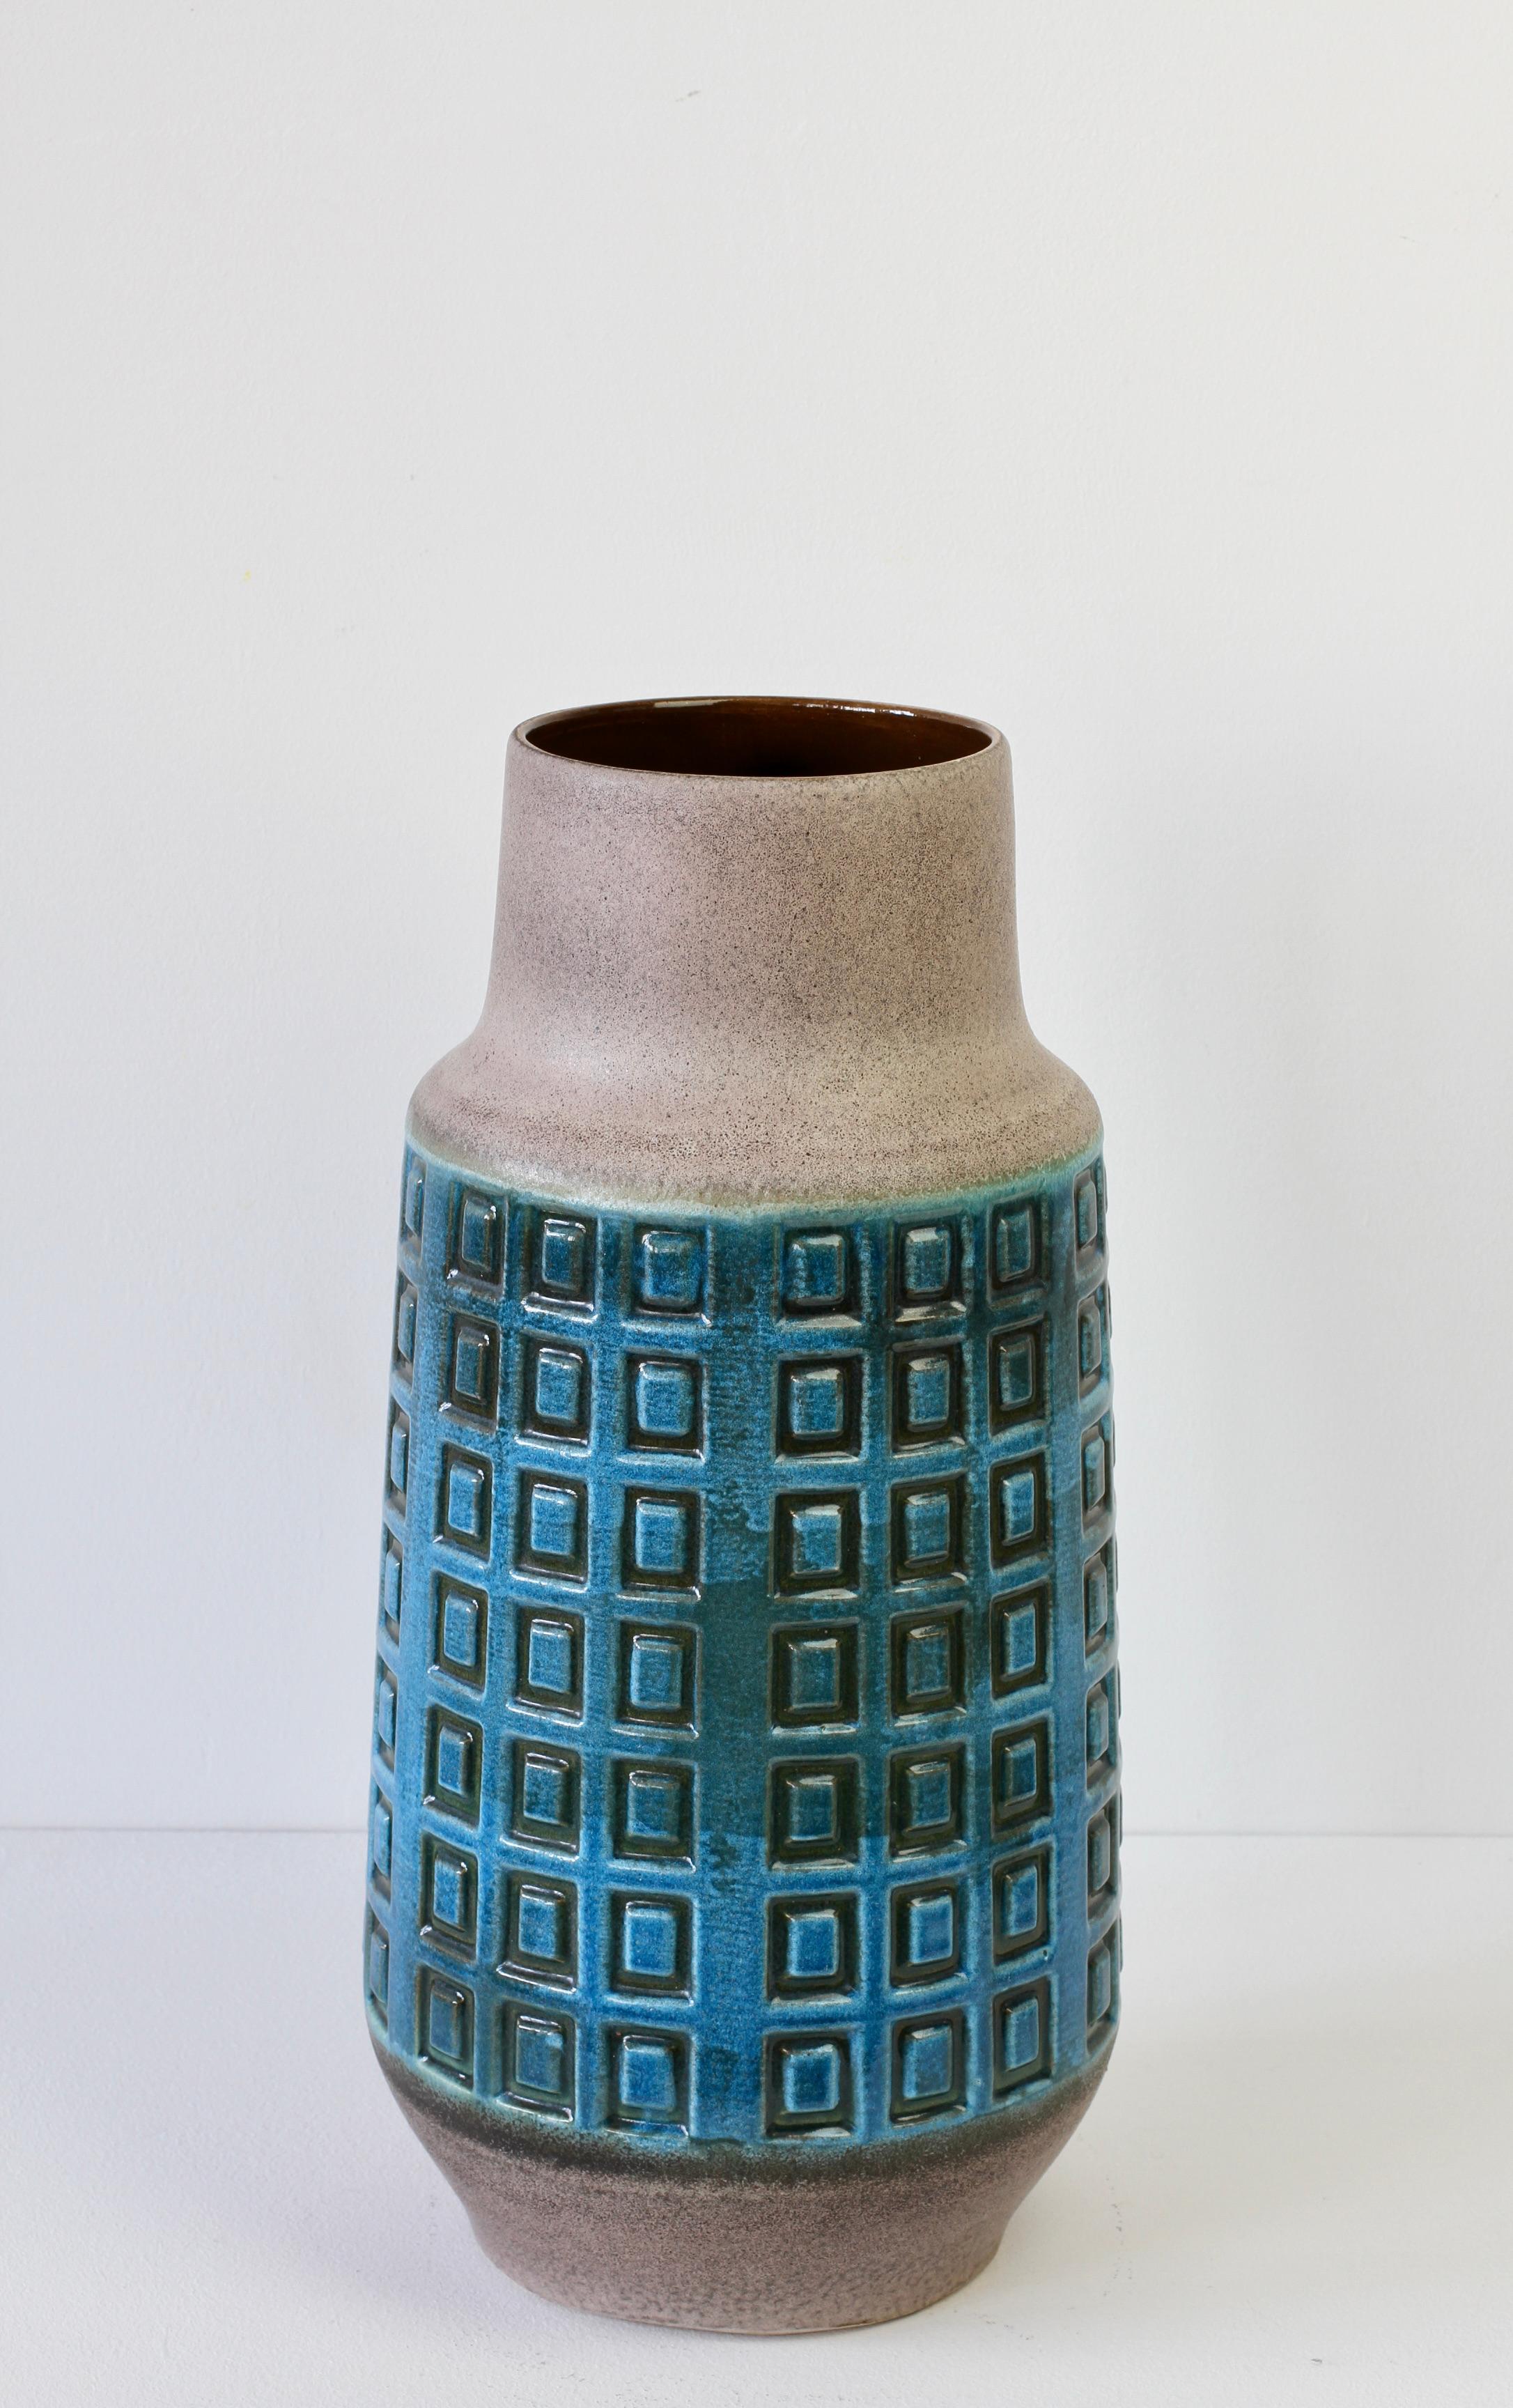 Great, tall and large floor standing handled vase or umbrella stand by West German pottery manufacturer Scheurich Keramik (ceramic), circa 1970. Add a splash of color / colour to your home decor with this beautiful blue glazed embossed square cube